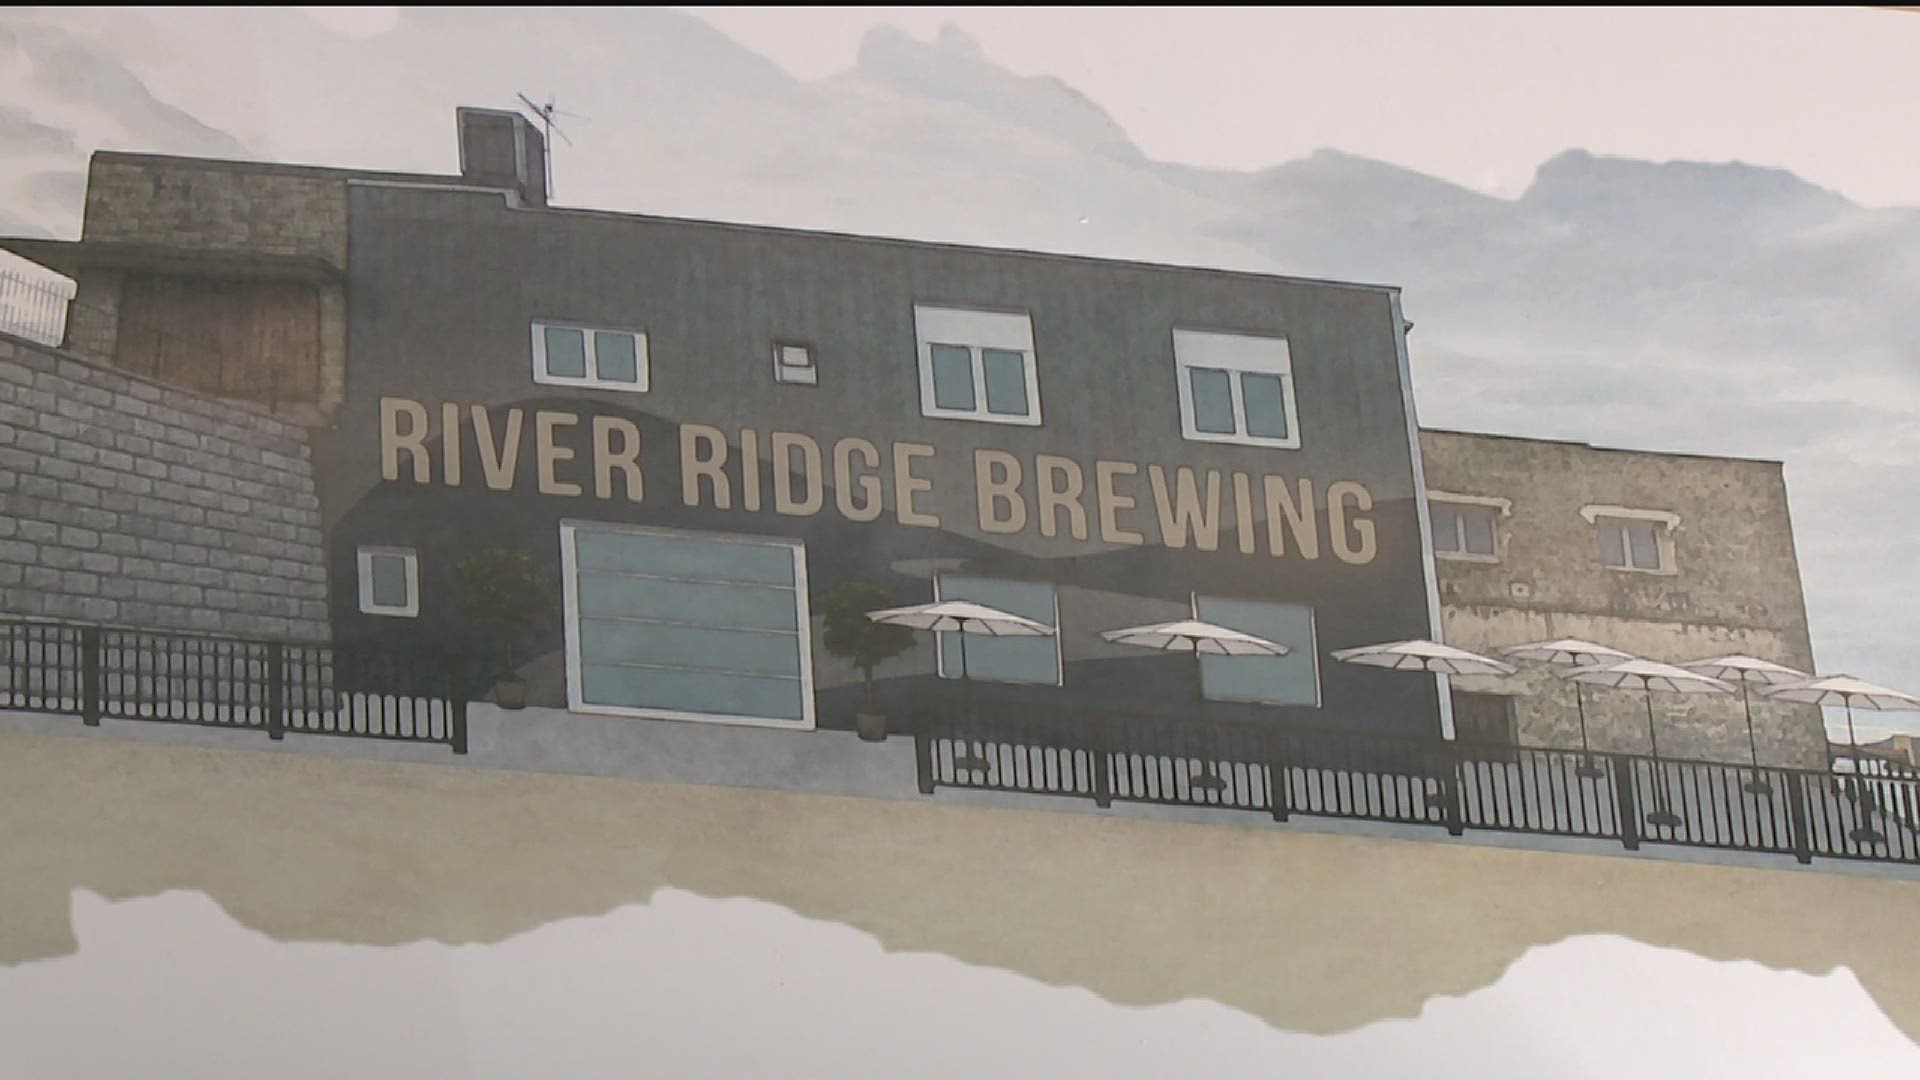 River Ridge Brewery opened in Bellevue in 2016. But they've been closed much of this year because of the pandemic. That's going to change soon.